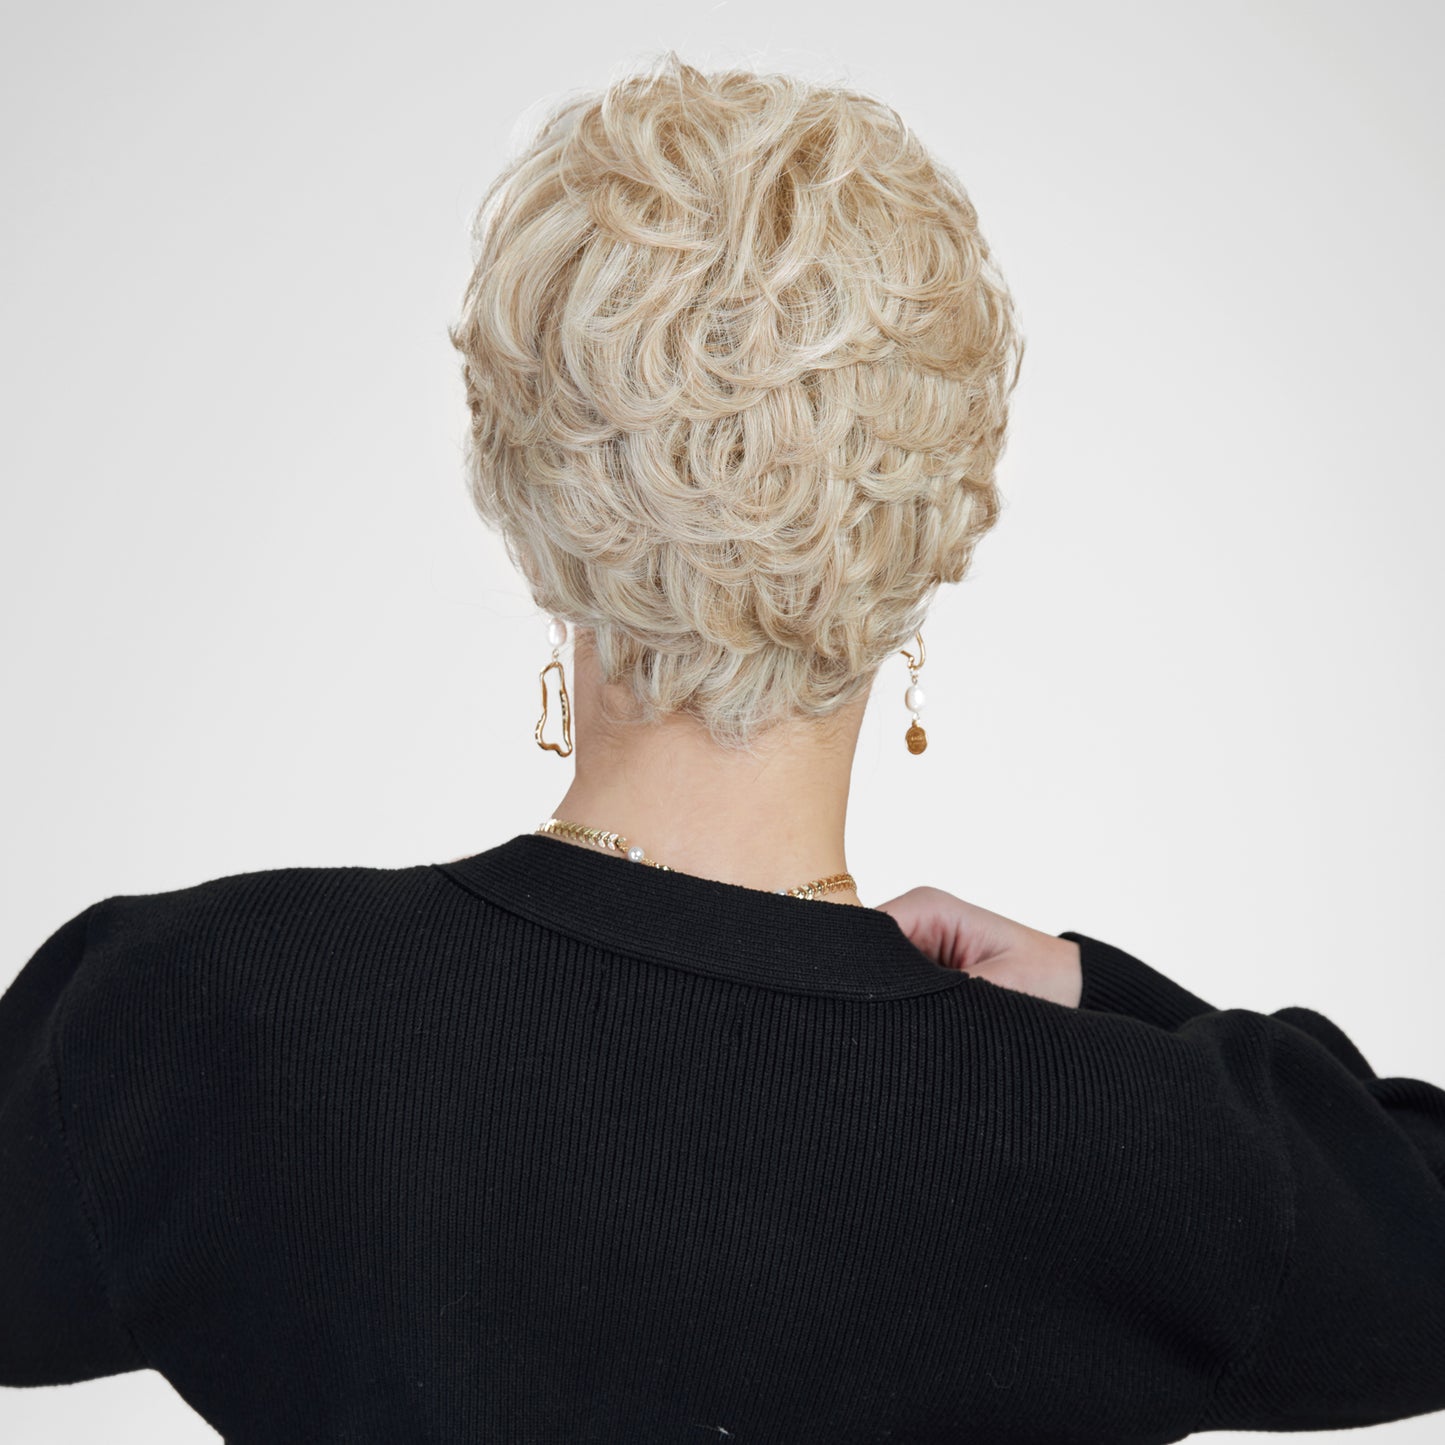 【MONO】【Galatea】Loxology | Synthetic Lace Front Short Blonde Wigs Breathable Wigs